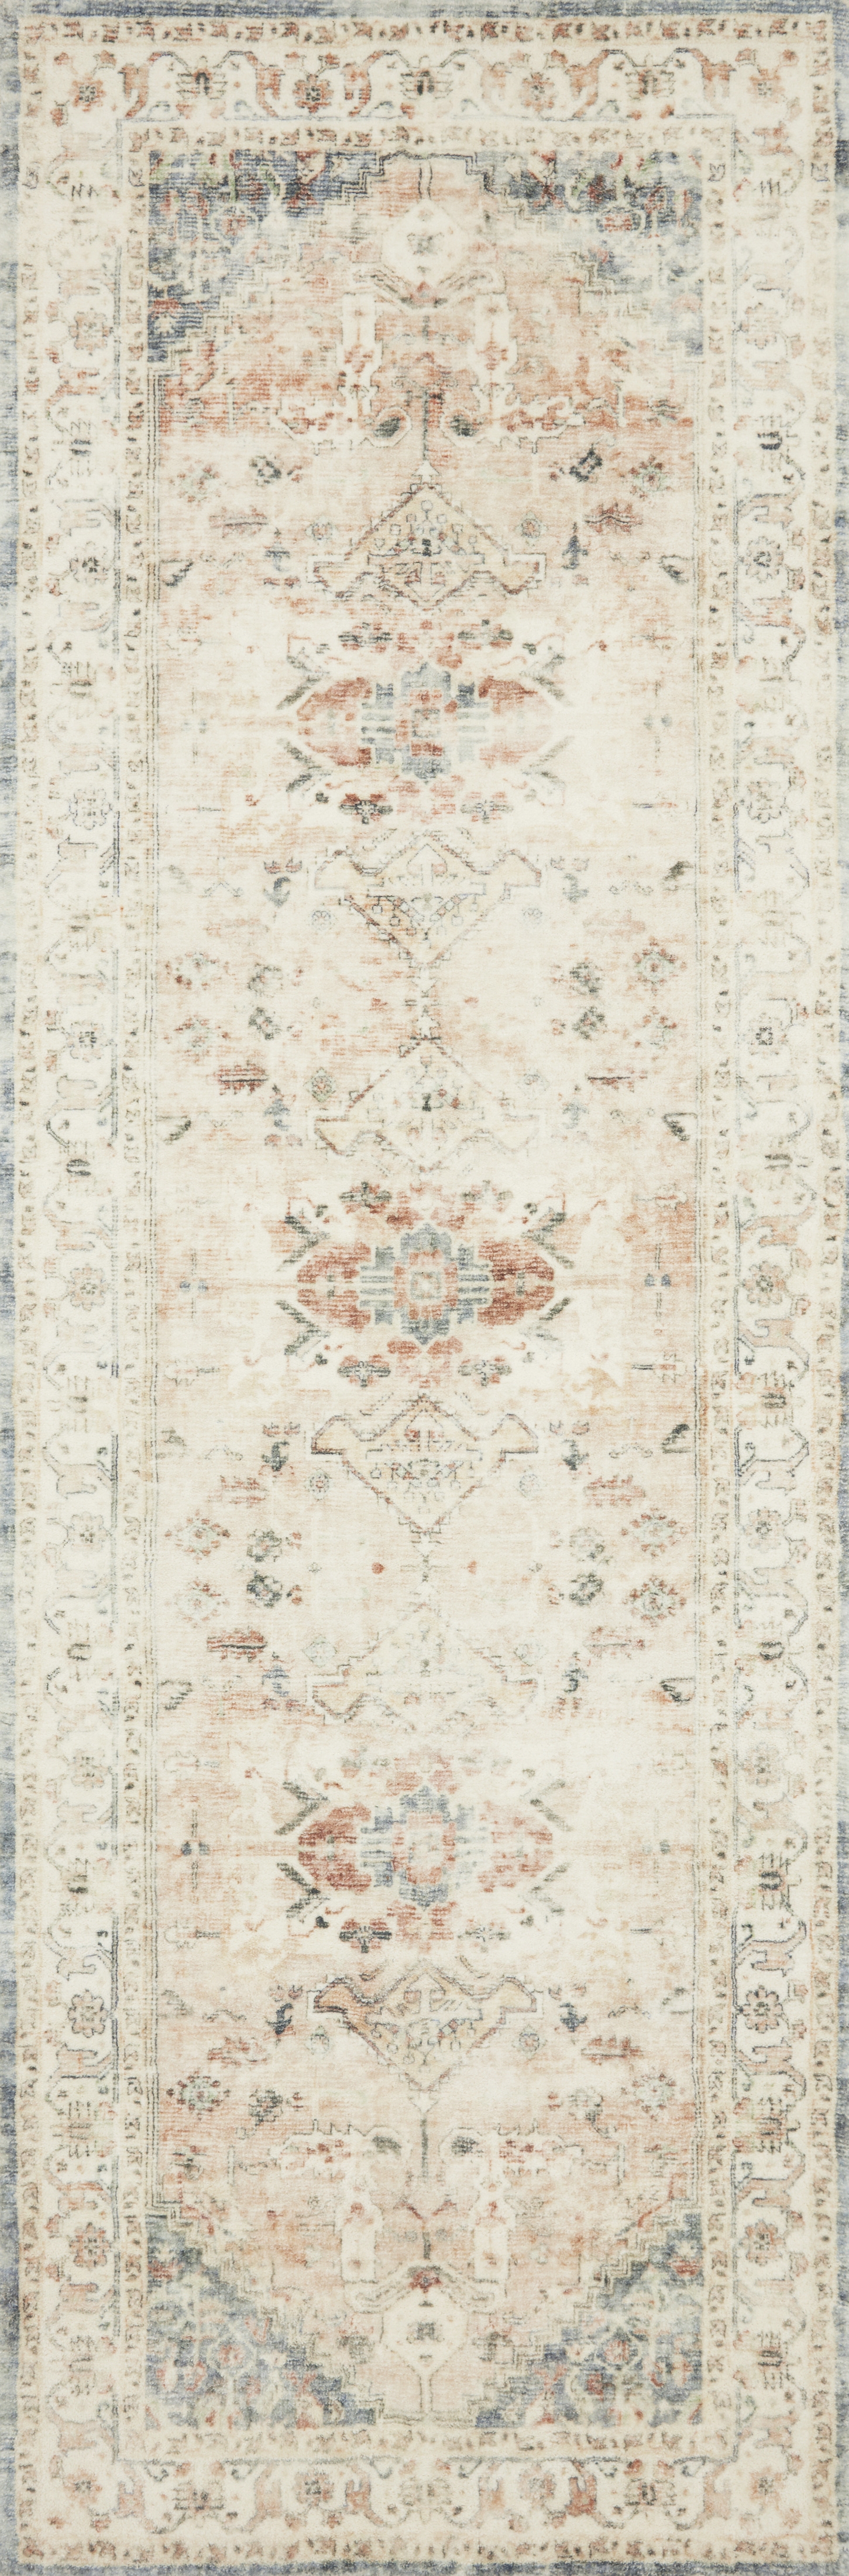 Rosette ROS-06 Clay / Ivory 5'-0" x 7'-6" - Image 2